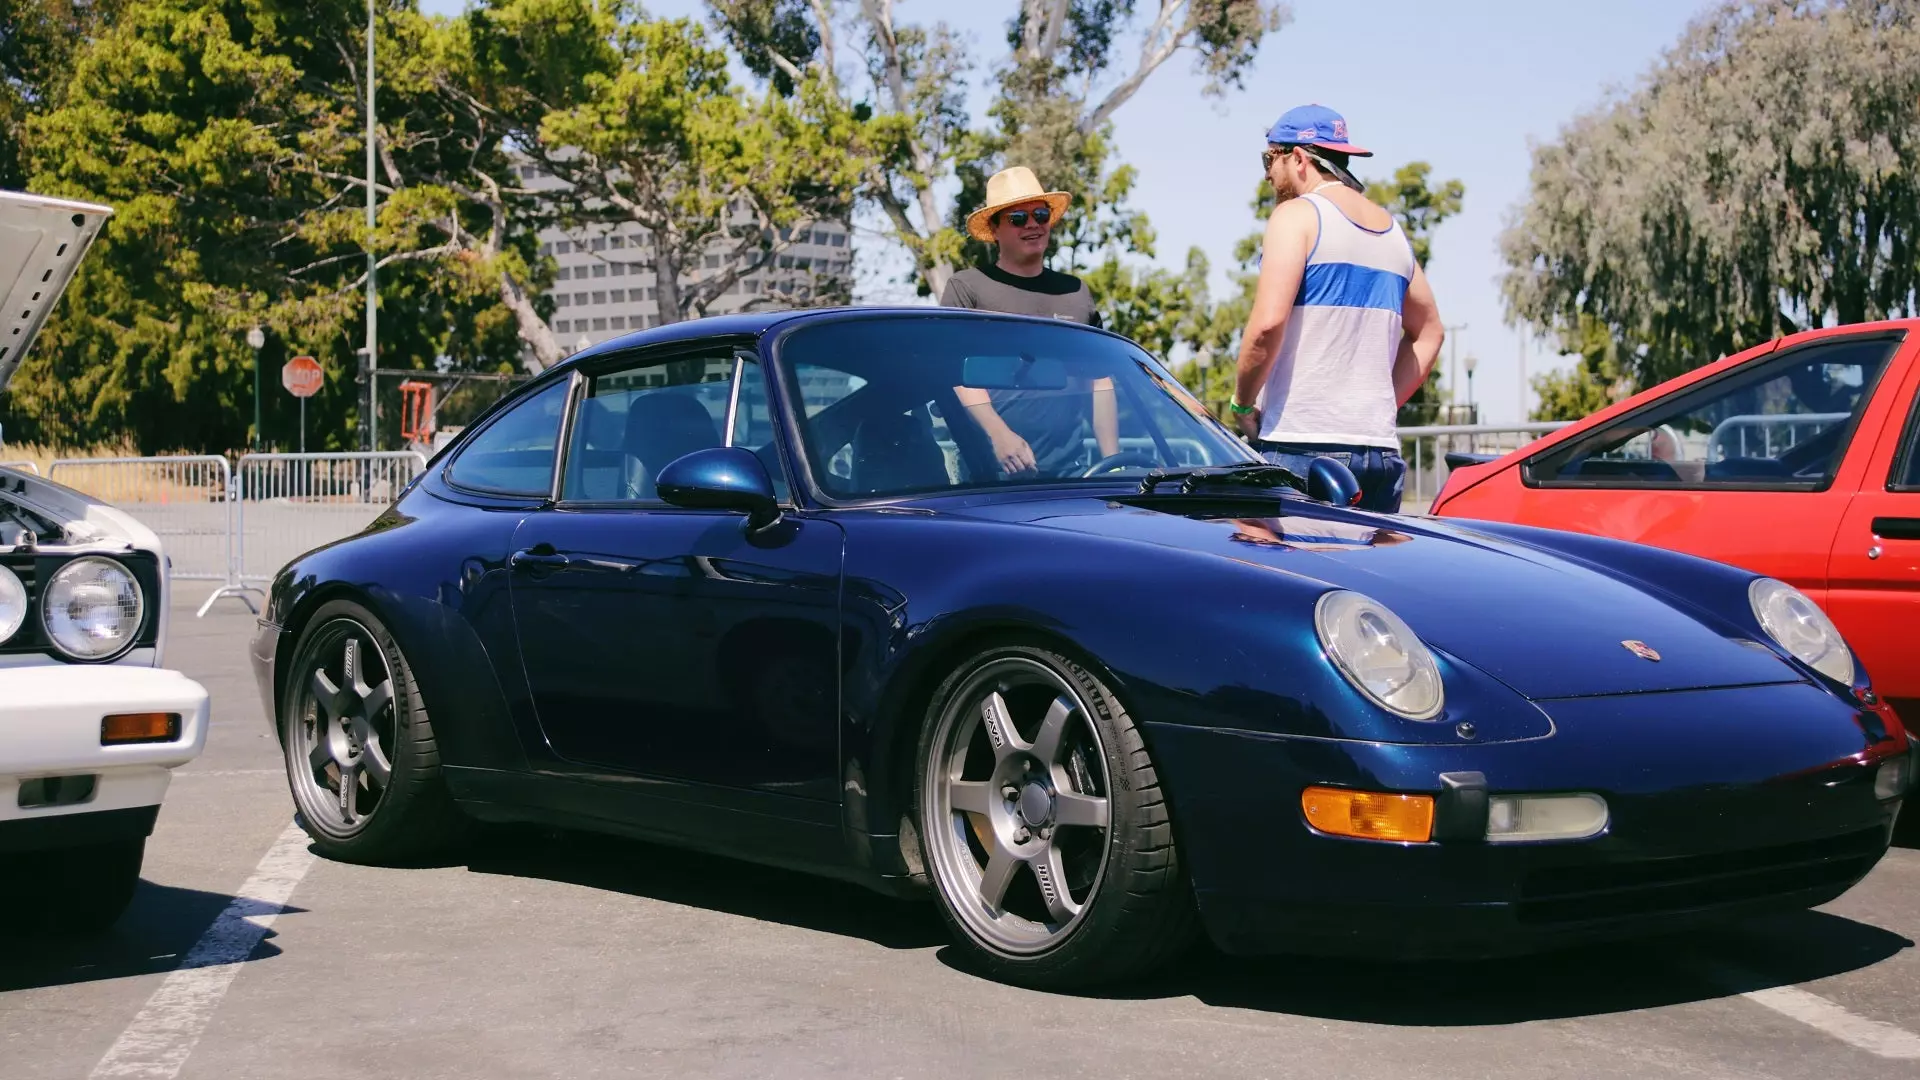 Air-Cooled Porsches Look So Good on Non-Traditional Wheels | Autance